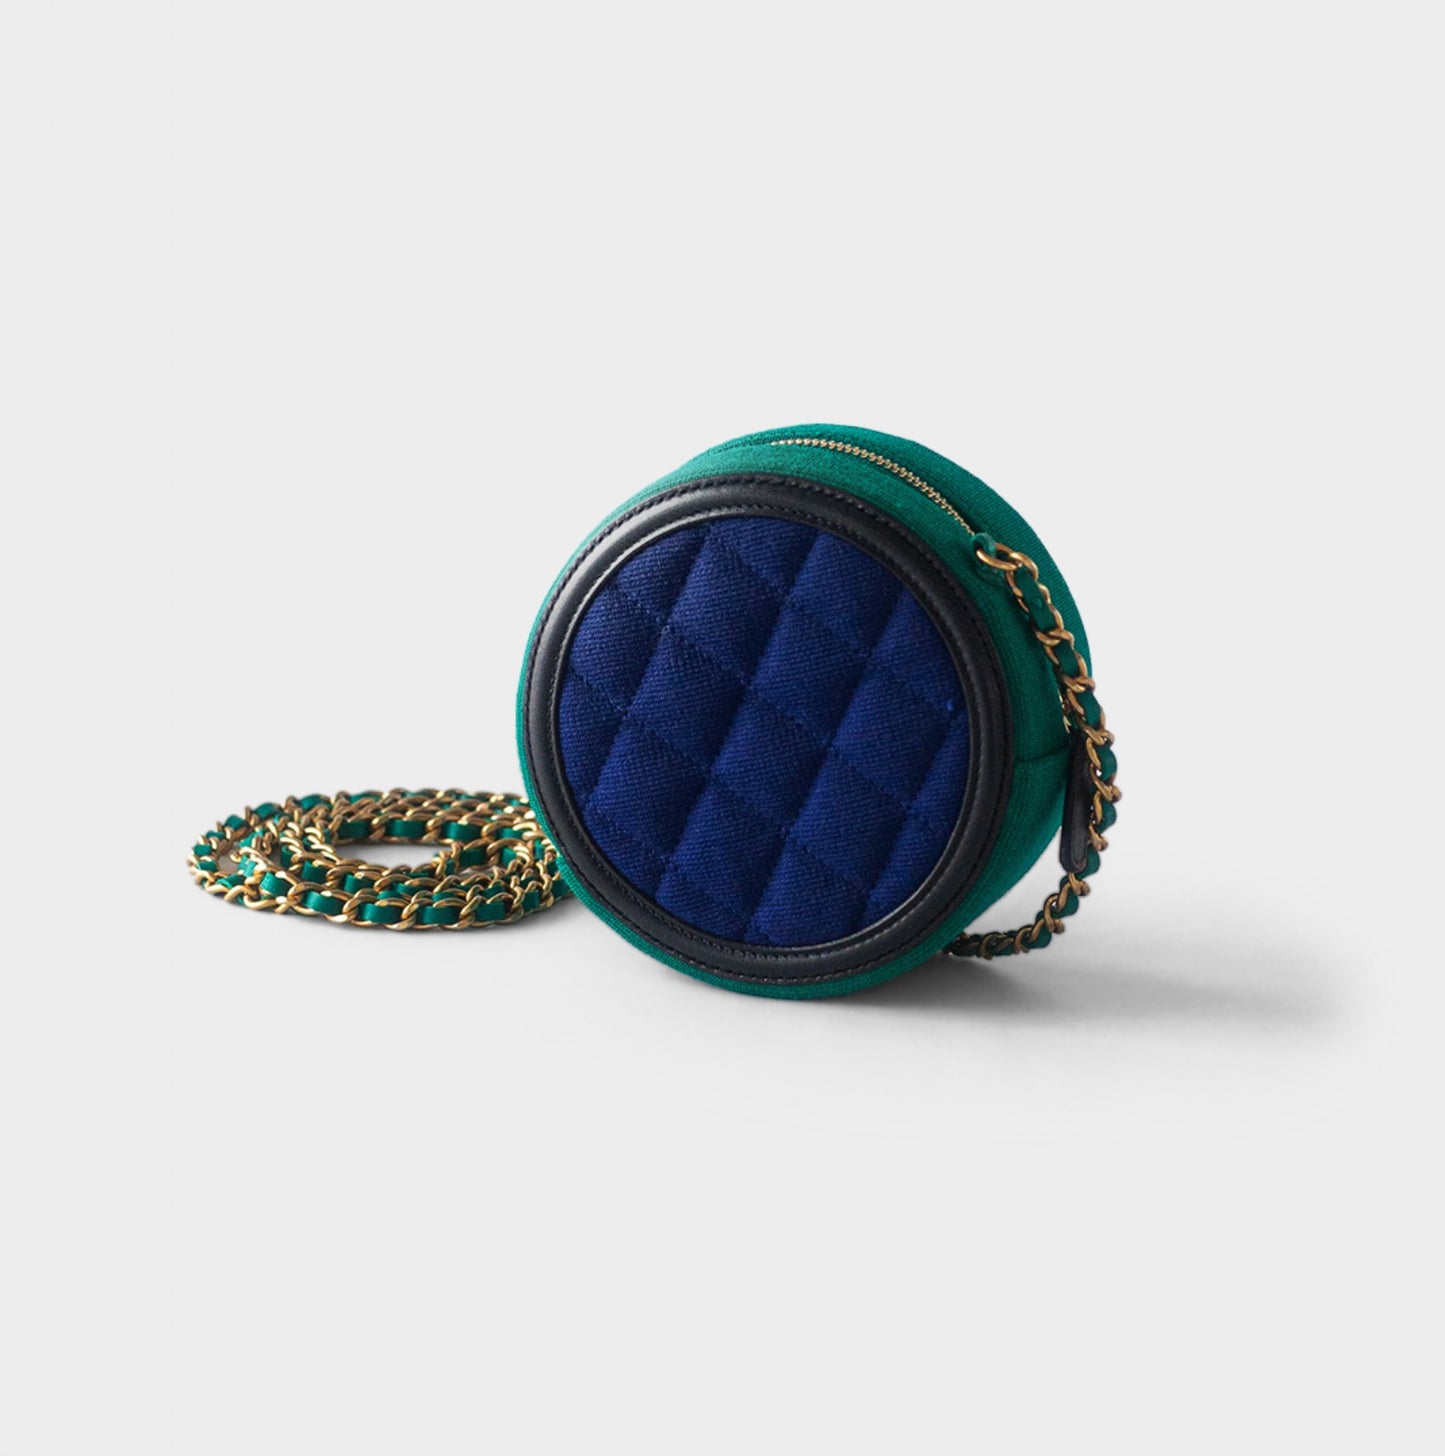 CHANEL - ROUND CLUTCH WITH CHAIN QUILTED JERSEY WOTH LAMBSKIN LOGO BLUE & GREEN